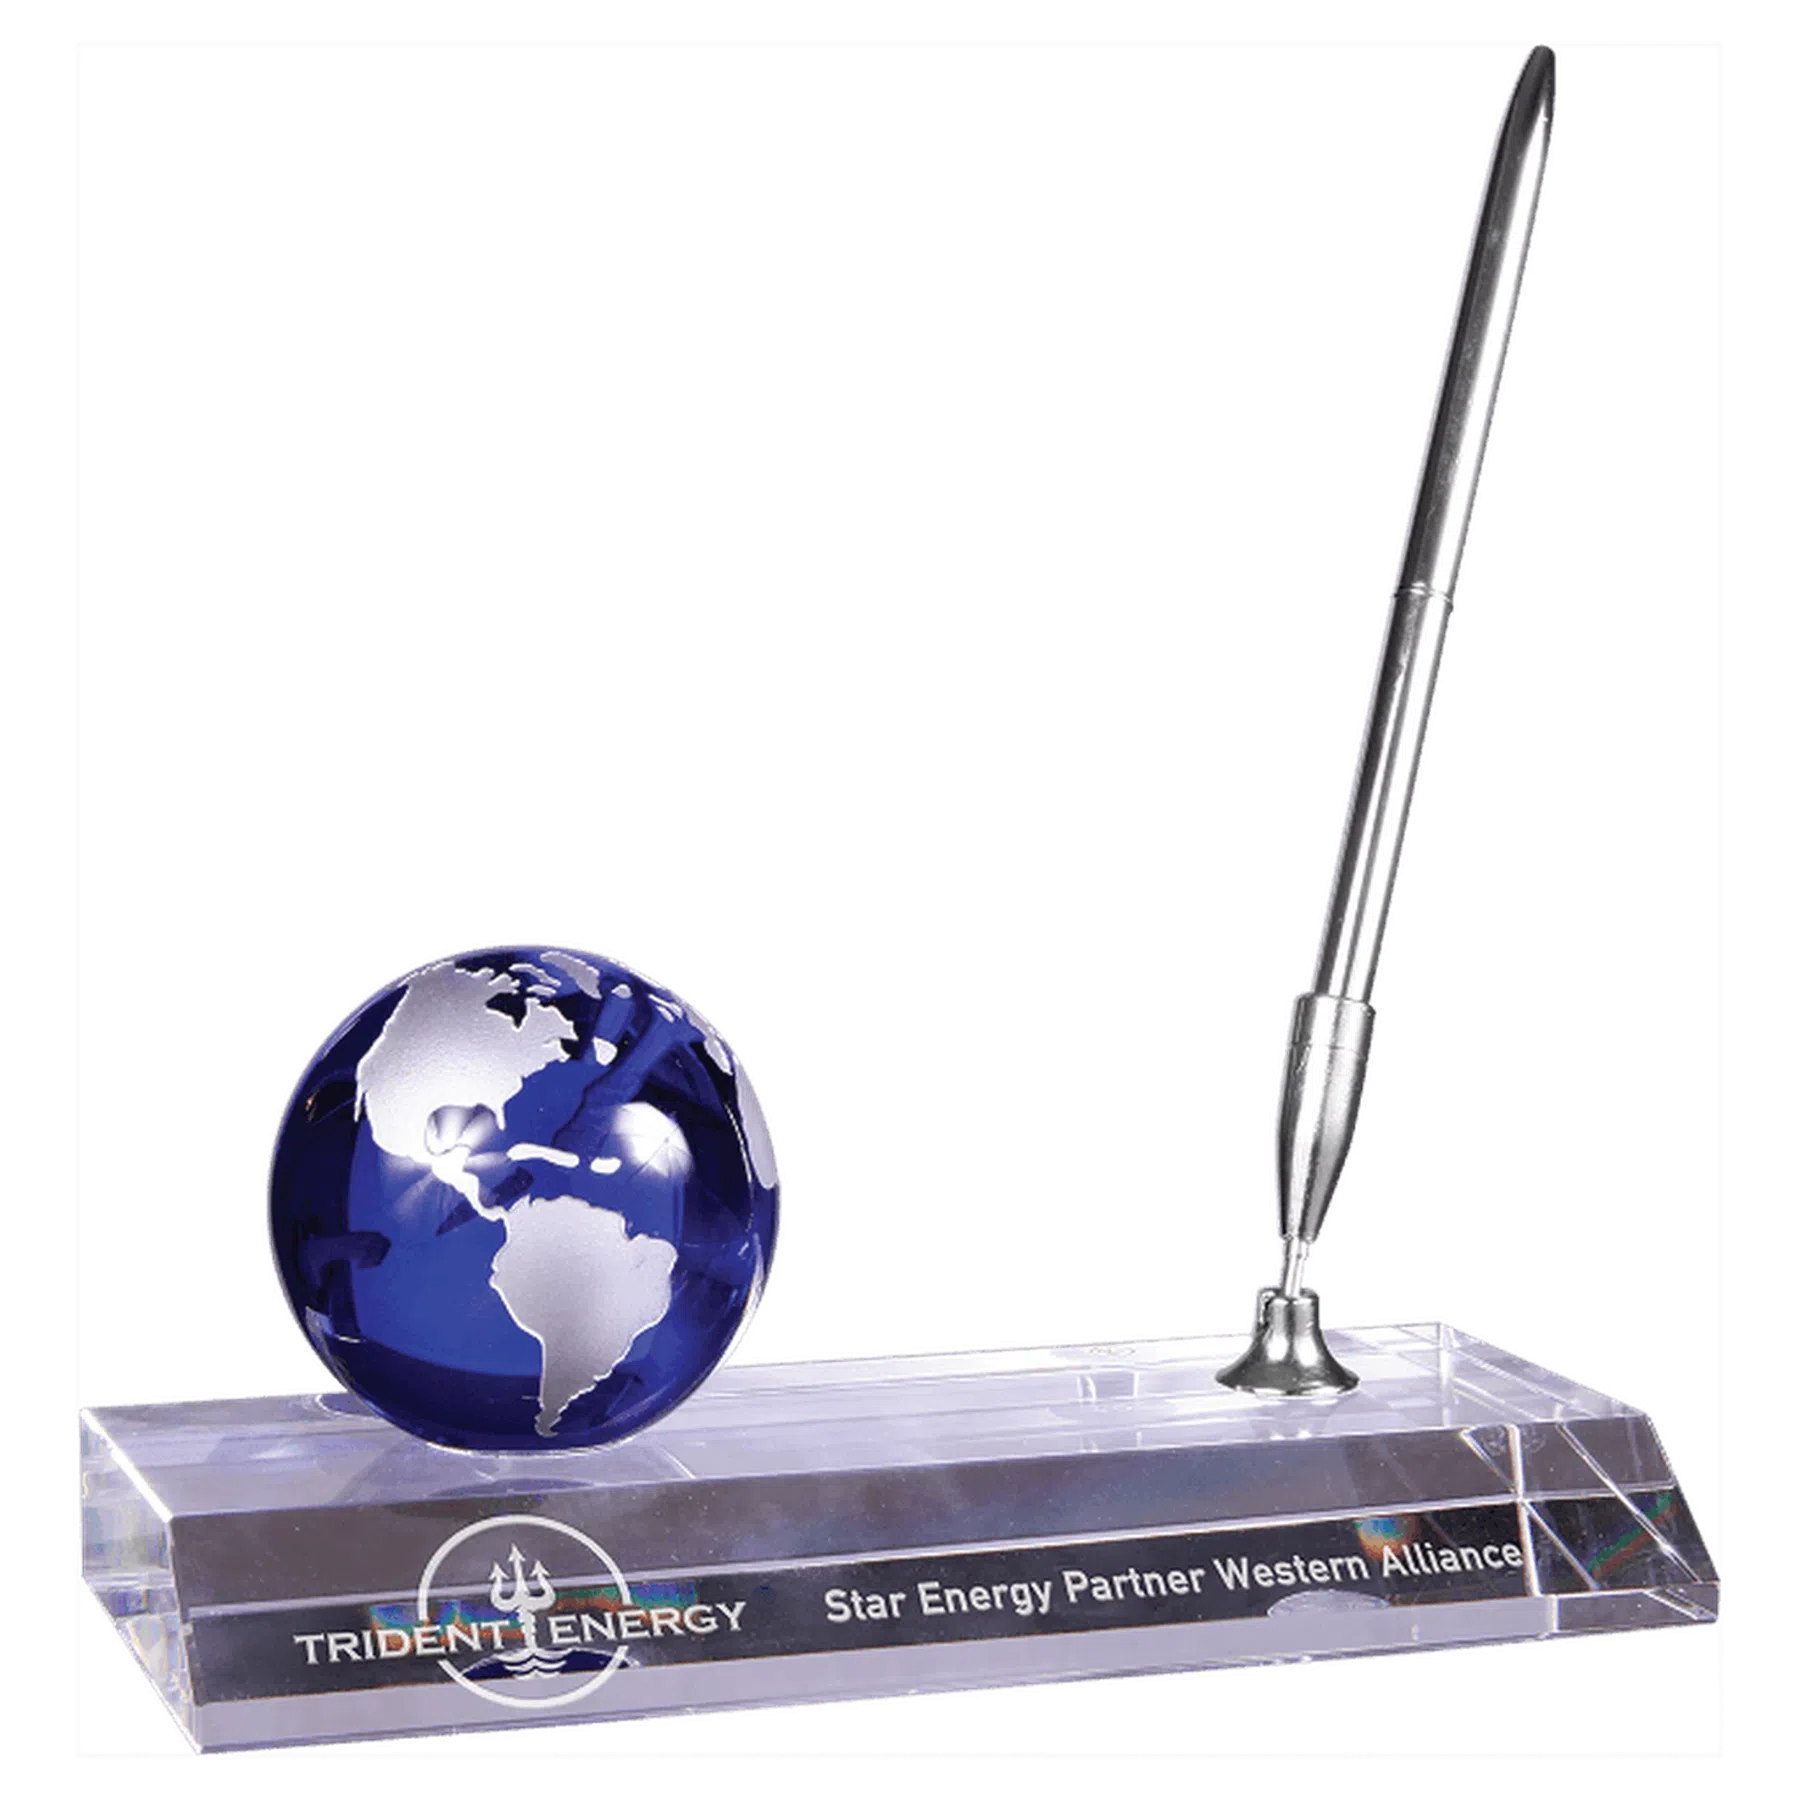 Blue Optic Crystal Globe with Base and Pen